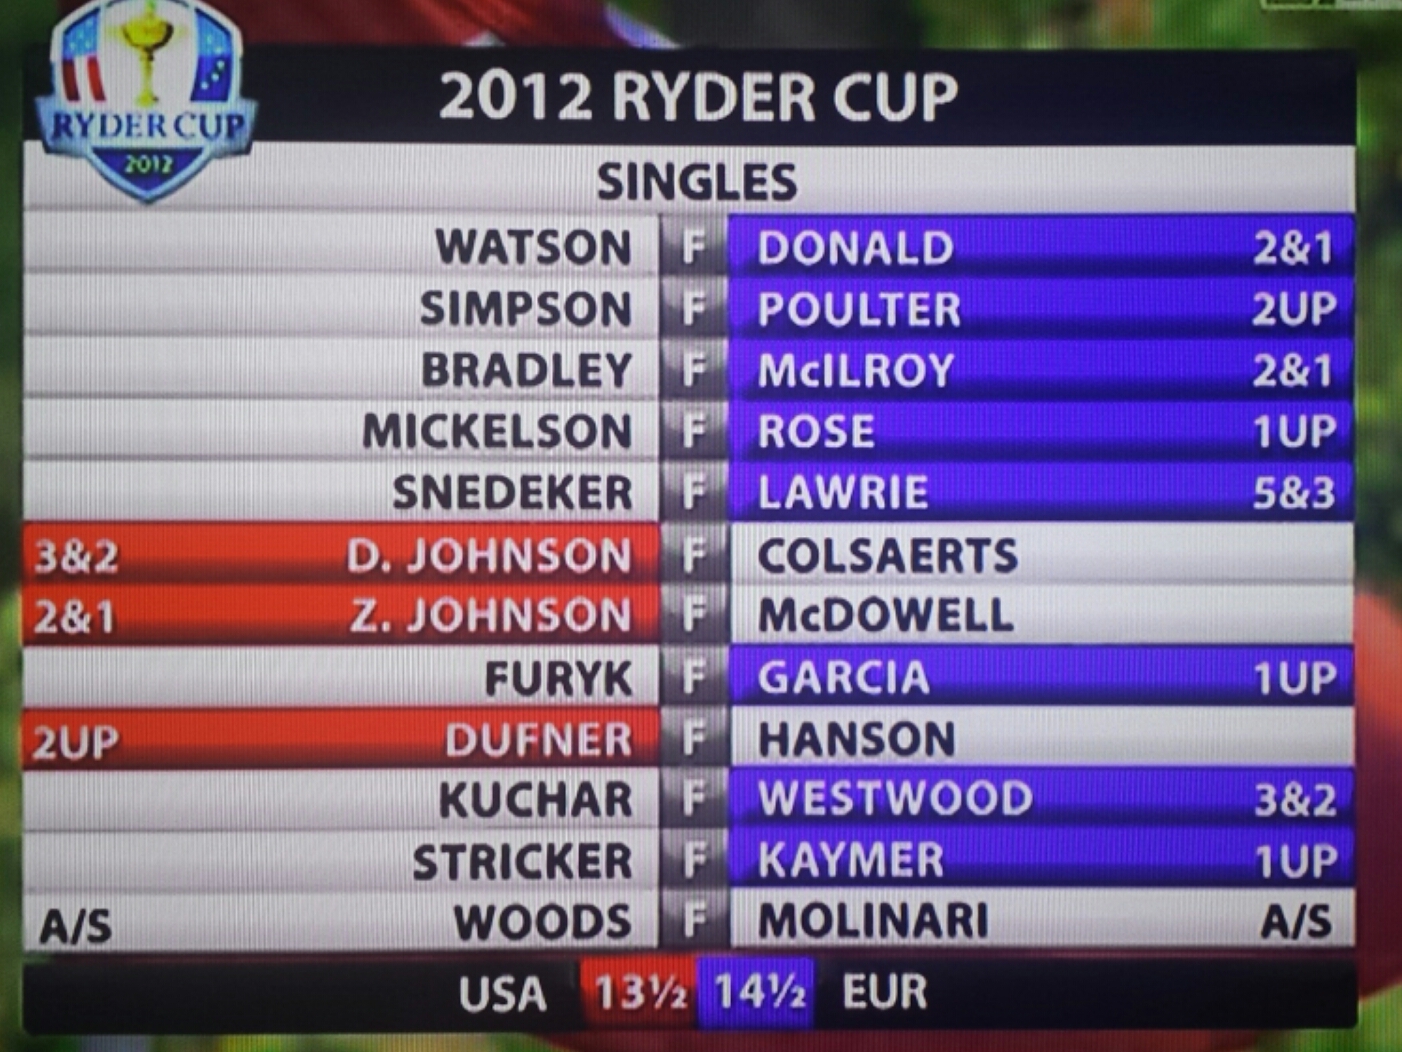 Be Warned This Ryder Cup Might Need Another "Miracle" For Europe To Win